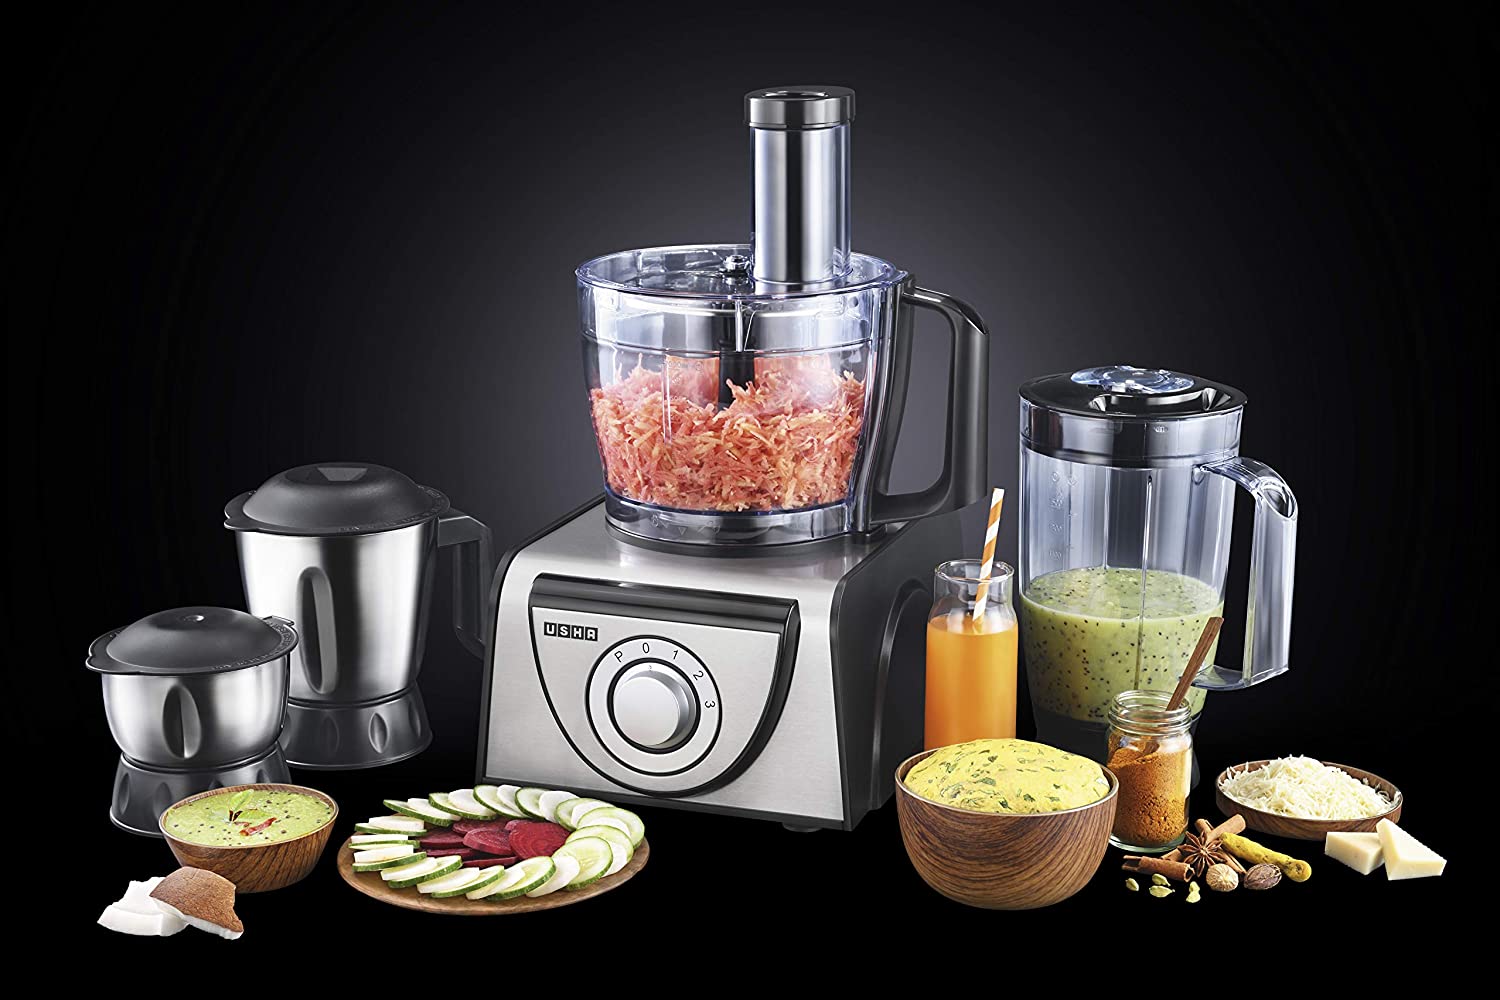 Hamilton Beach Professional 4-in-1 Juicer Mixer Grider, Commercial-Grade  1400 Watt, 3 Leakproof Jars, For Wet and Dry Spices, Chutneys and Curries